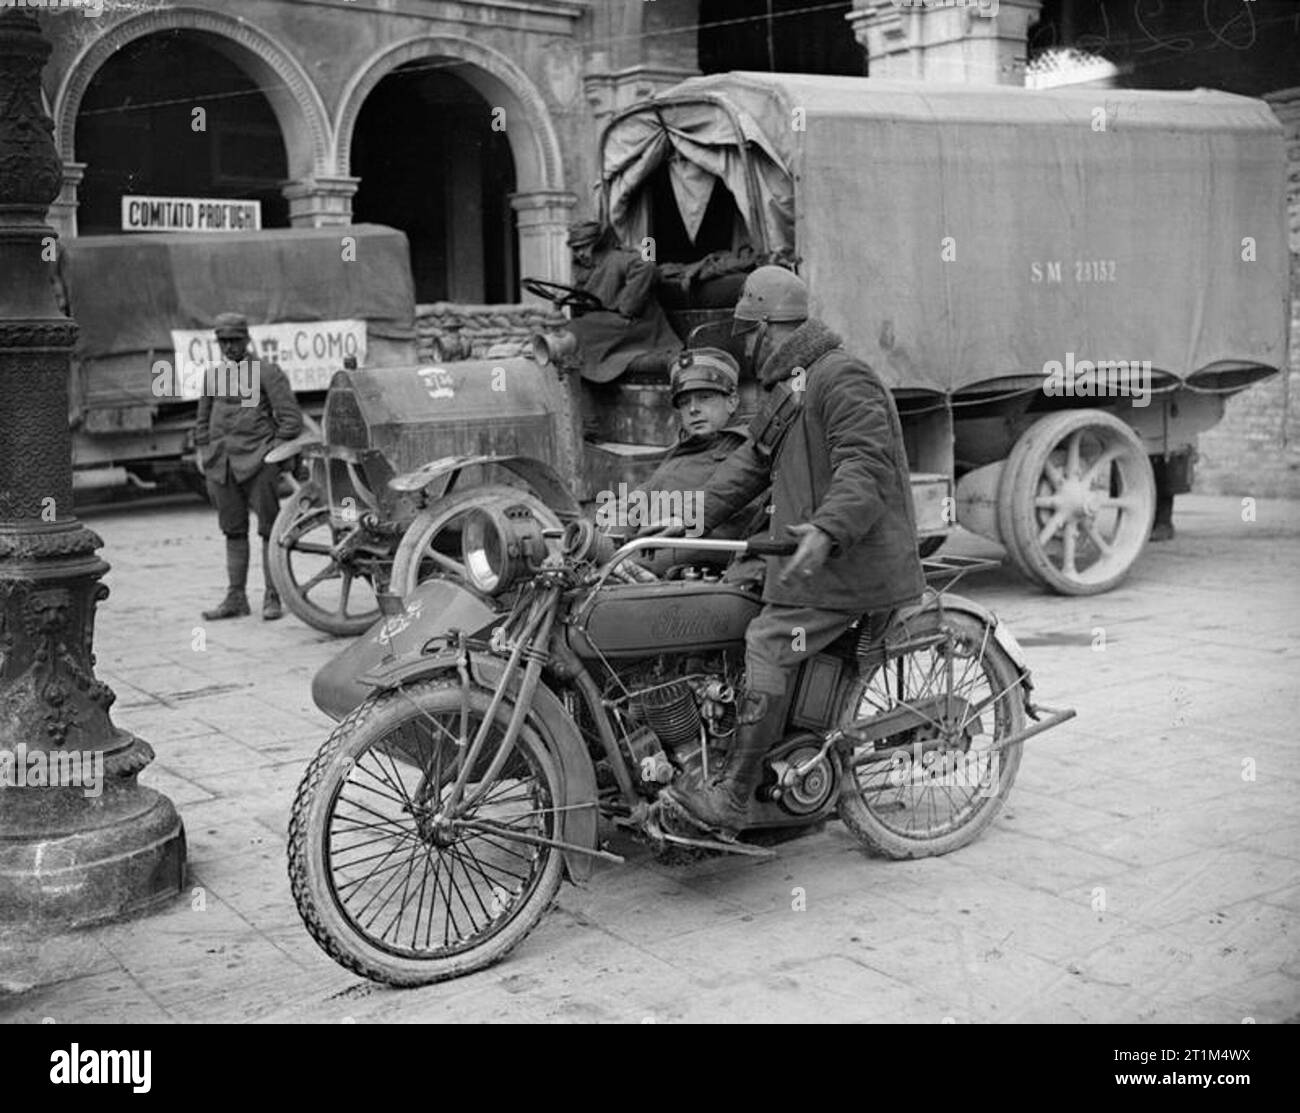 Military Motorcycles of the First World War INDIAN 999 cc twin cylinder machine fitted with a sidecar being used by two Italian army officers. Stock Photo